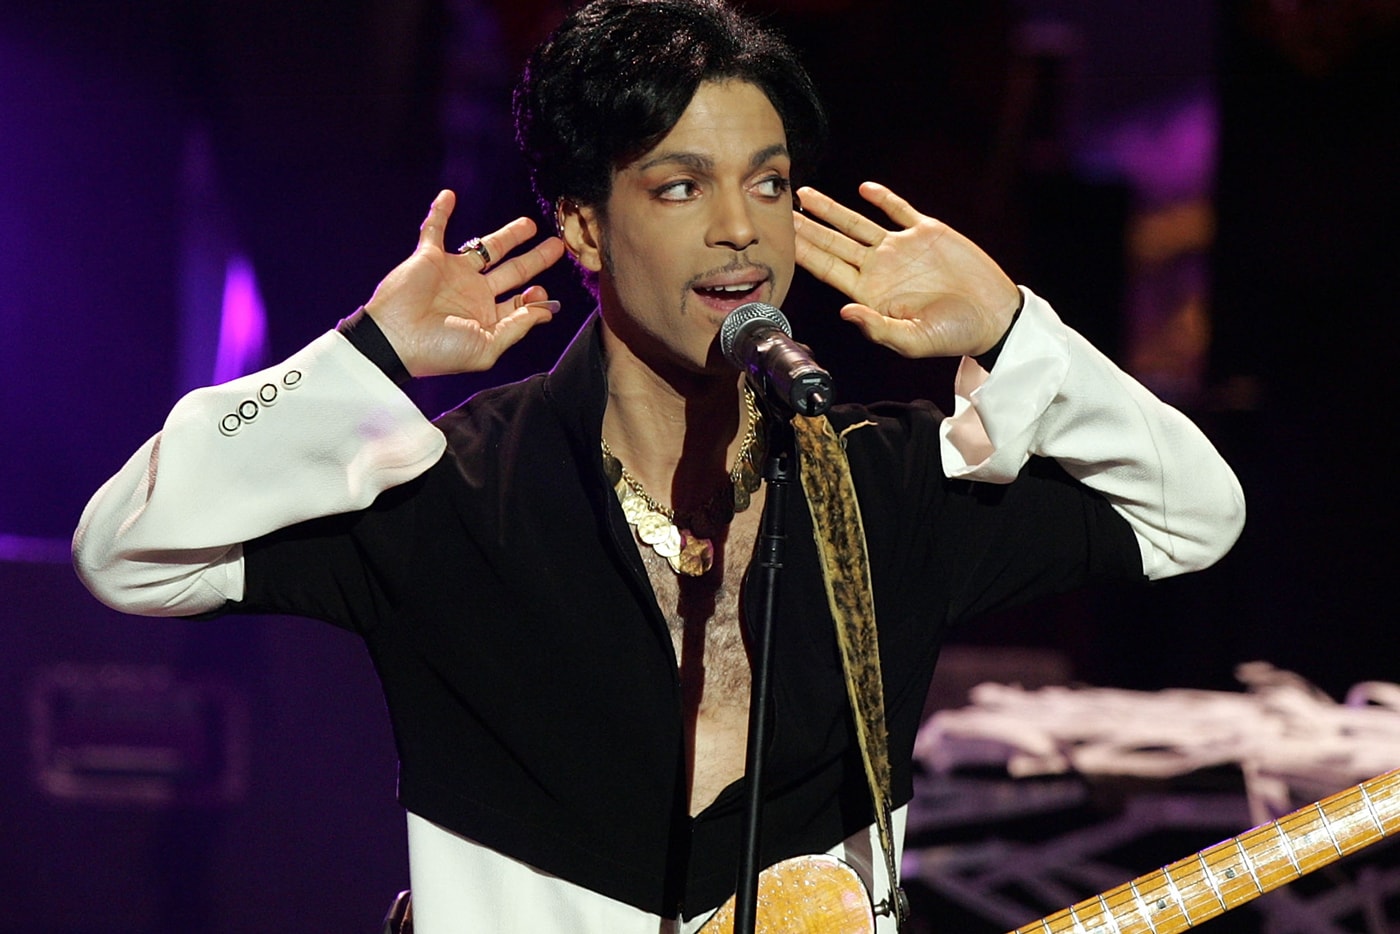 prince-spotted-courtside-at-golden-state-warriors-game